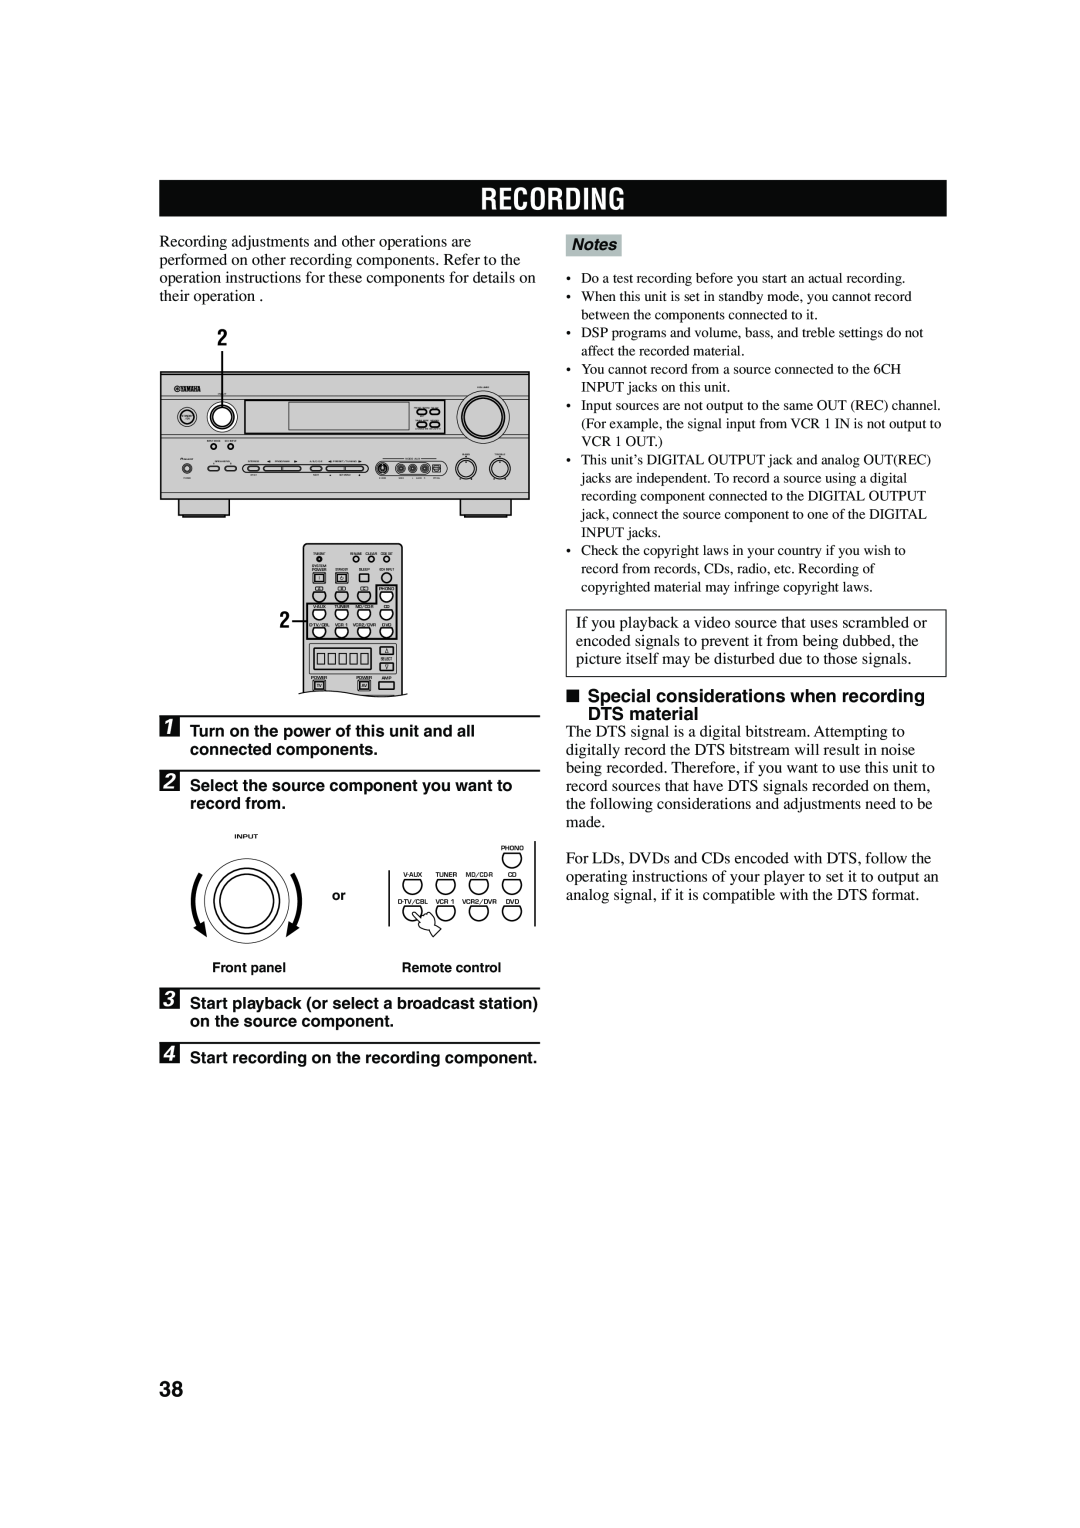 Yamaha RX-V740 owner manual Recording, Special considerations when recording, DTS material 